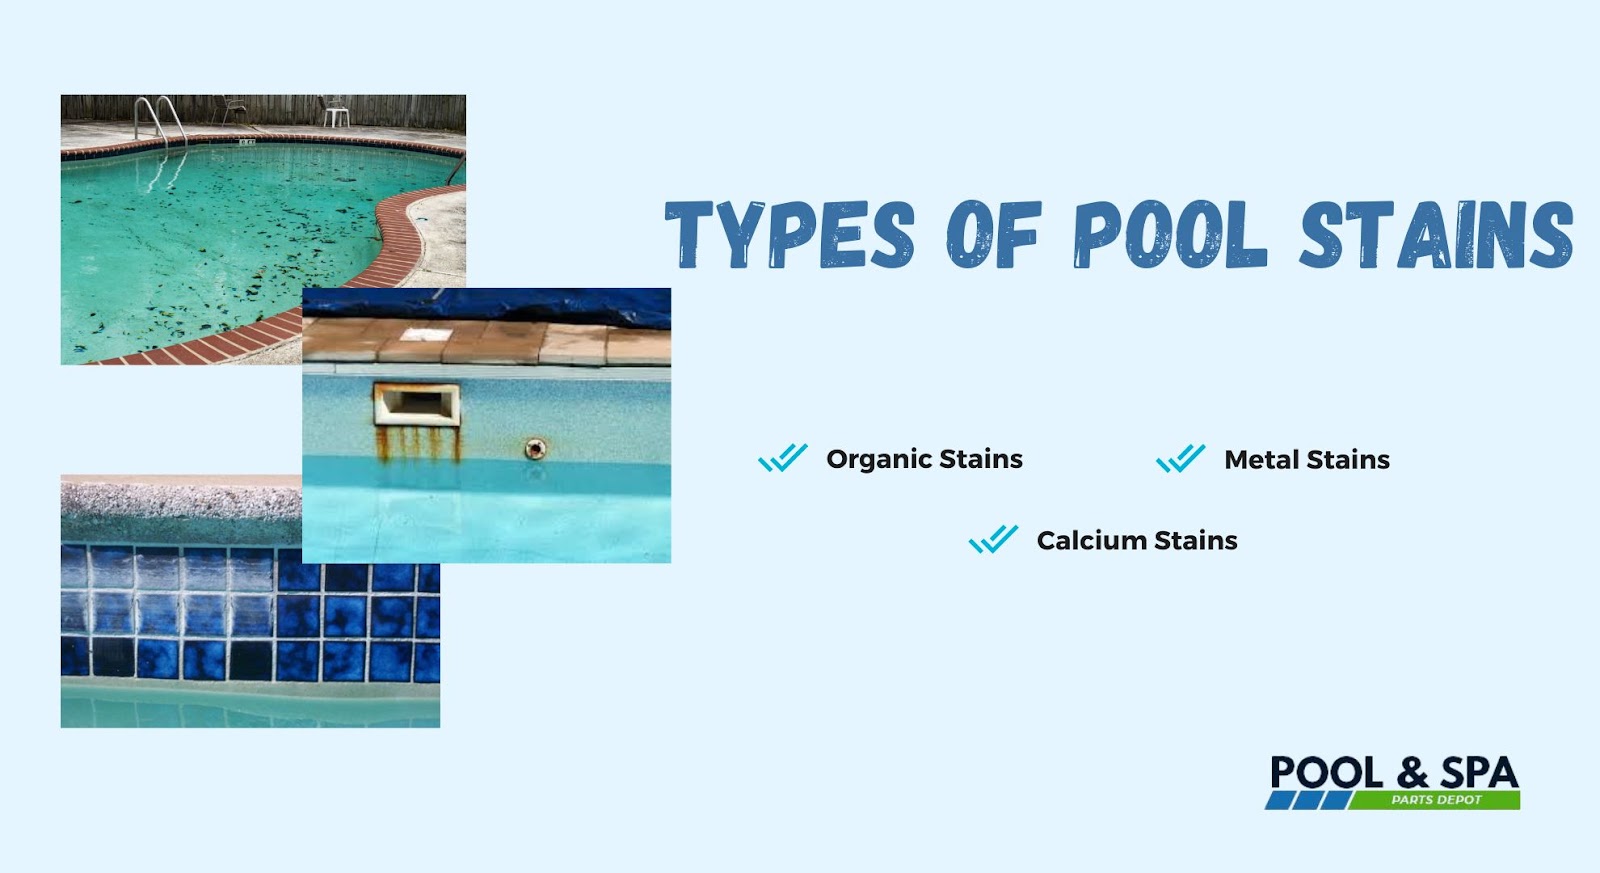 Types of Pool Stains